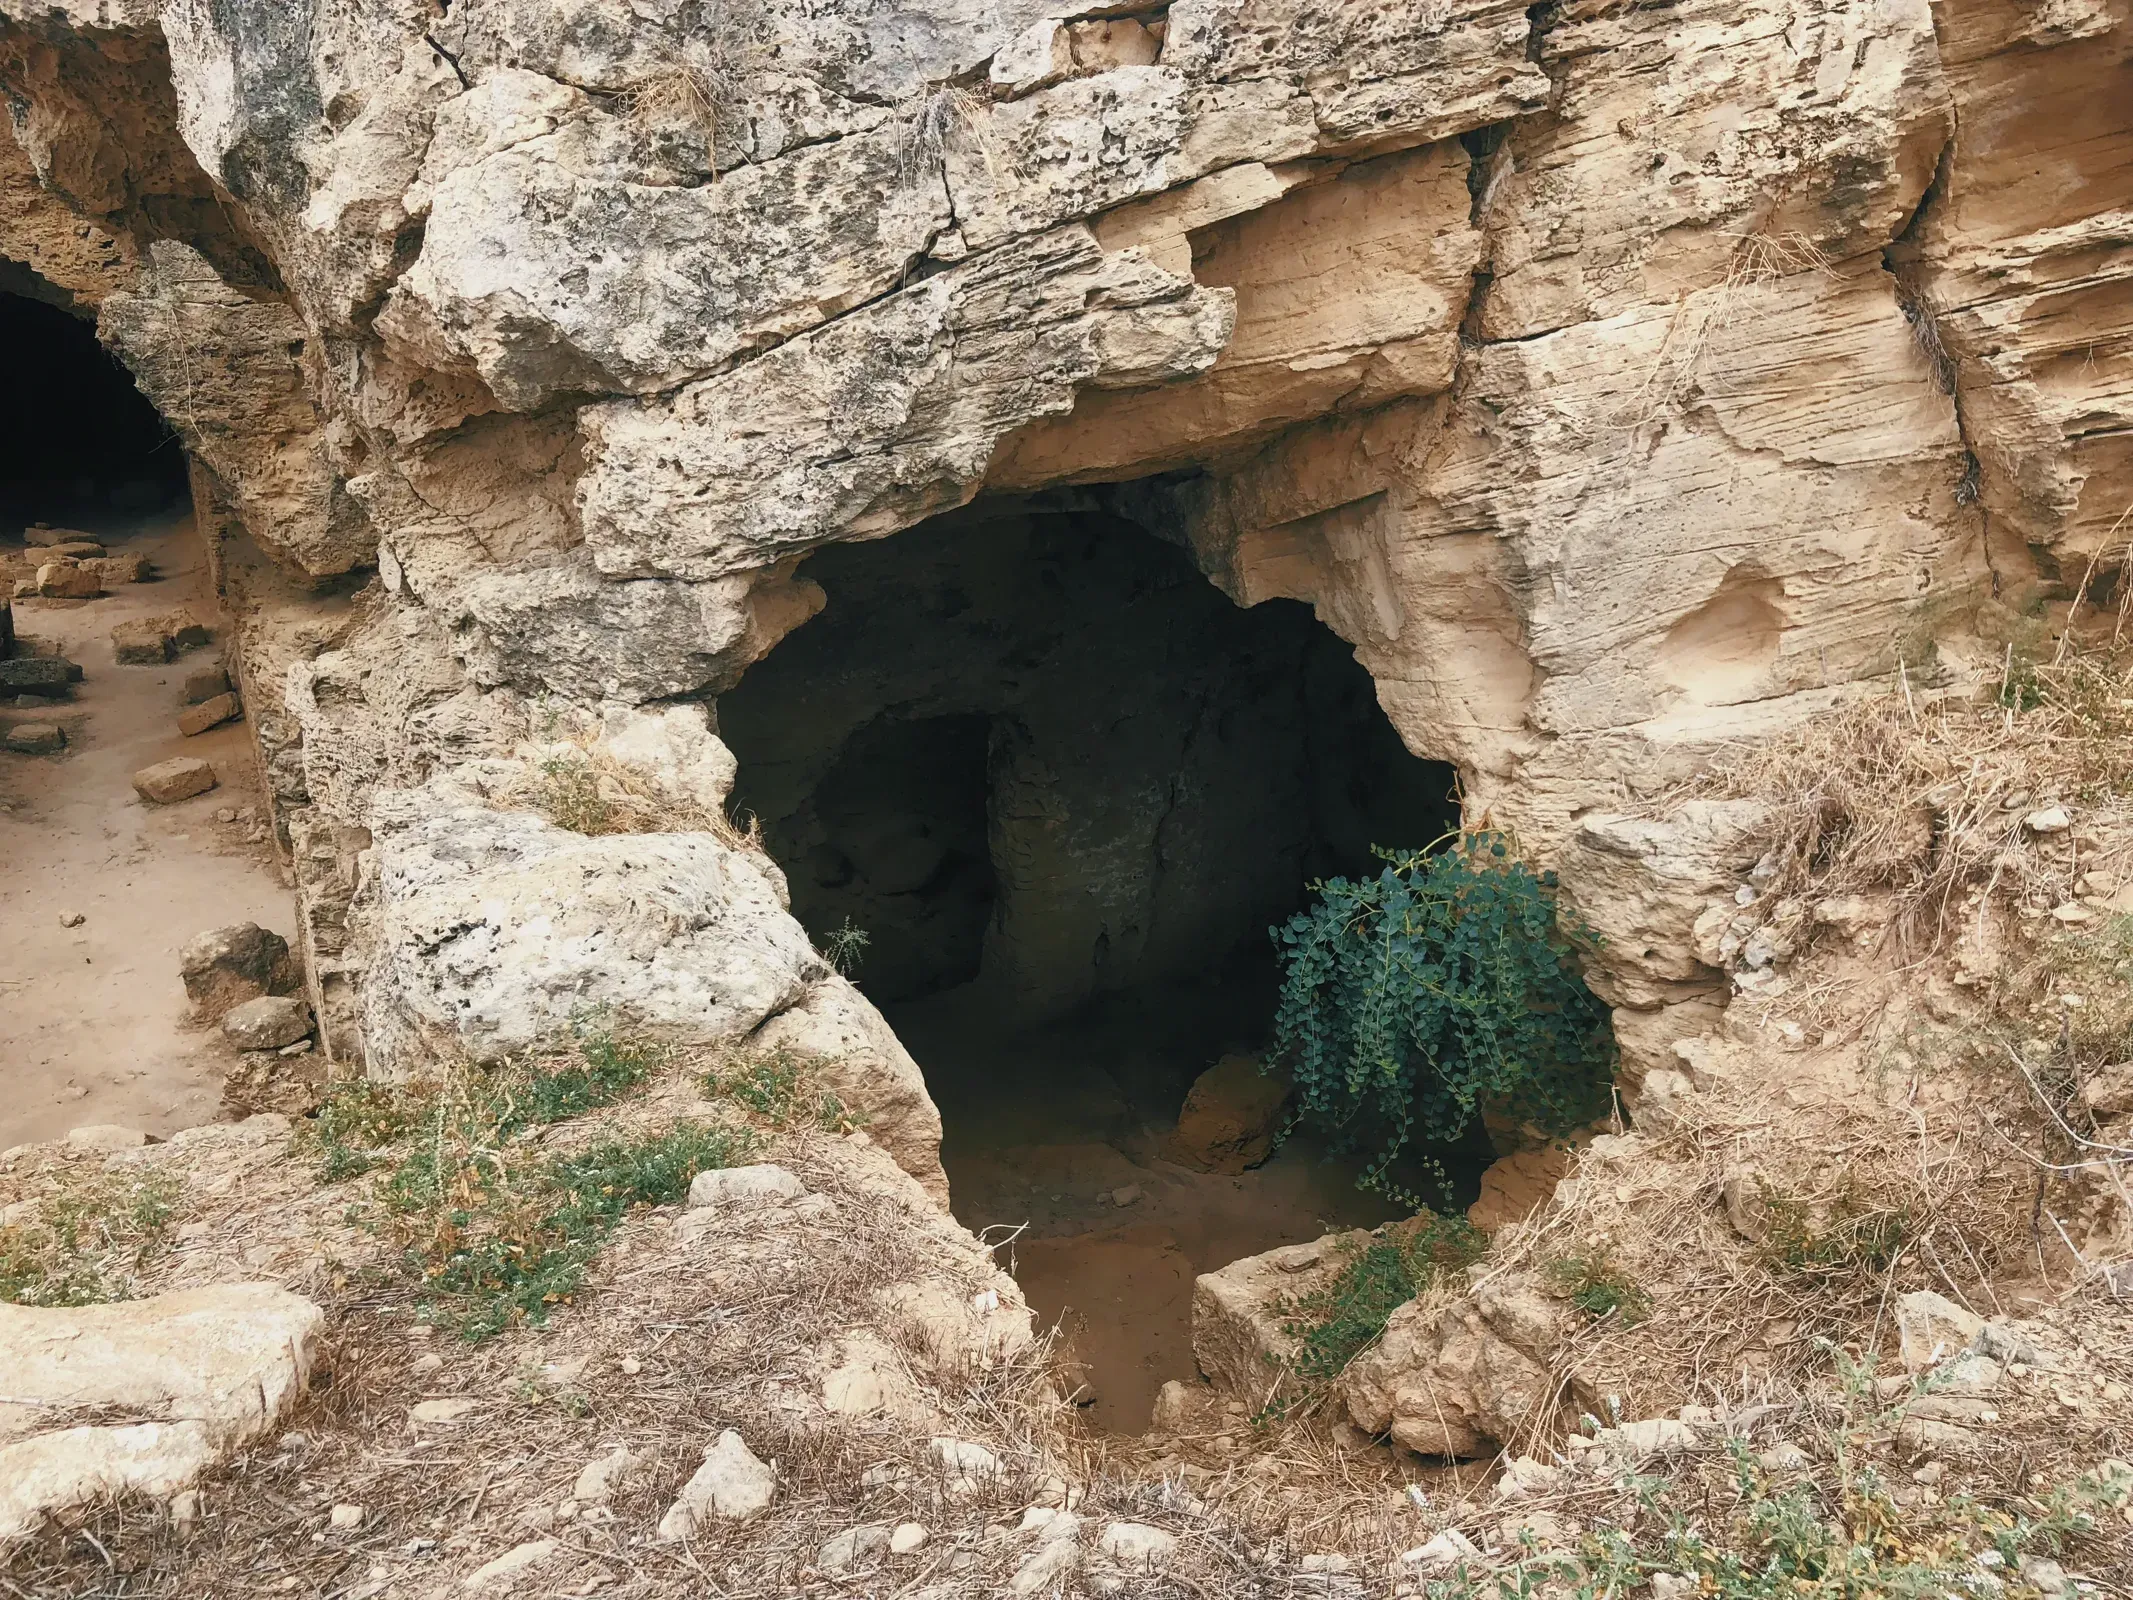 Natural cave in Nea Paphos surrounded by rocks and plant life